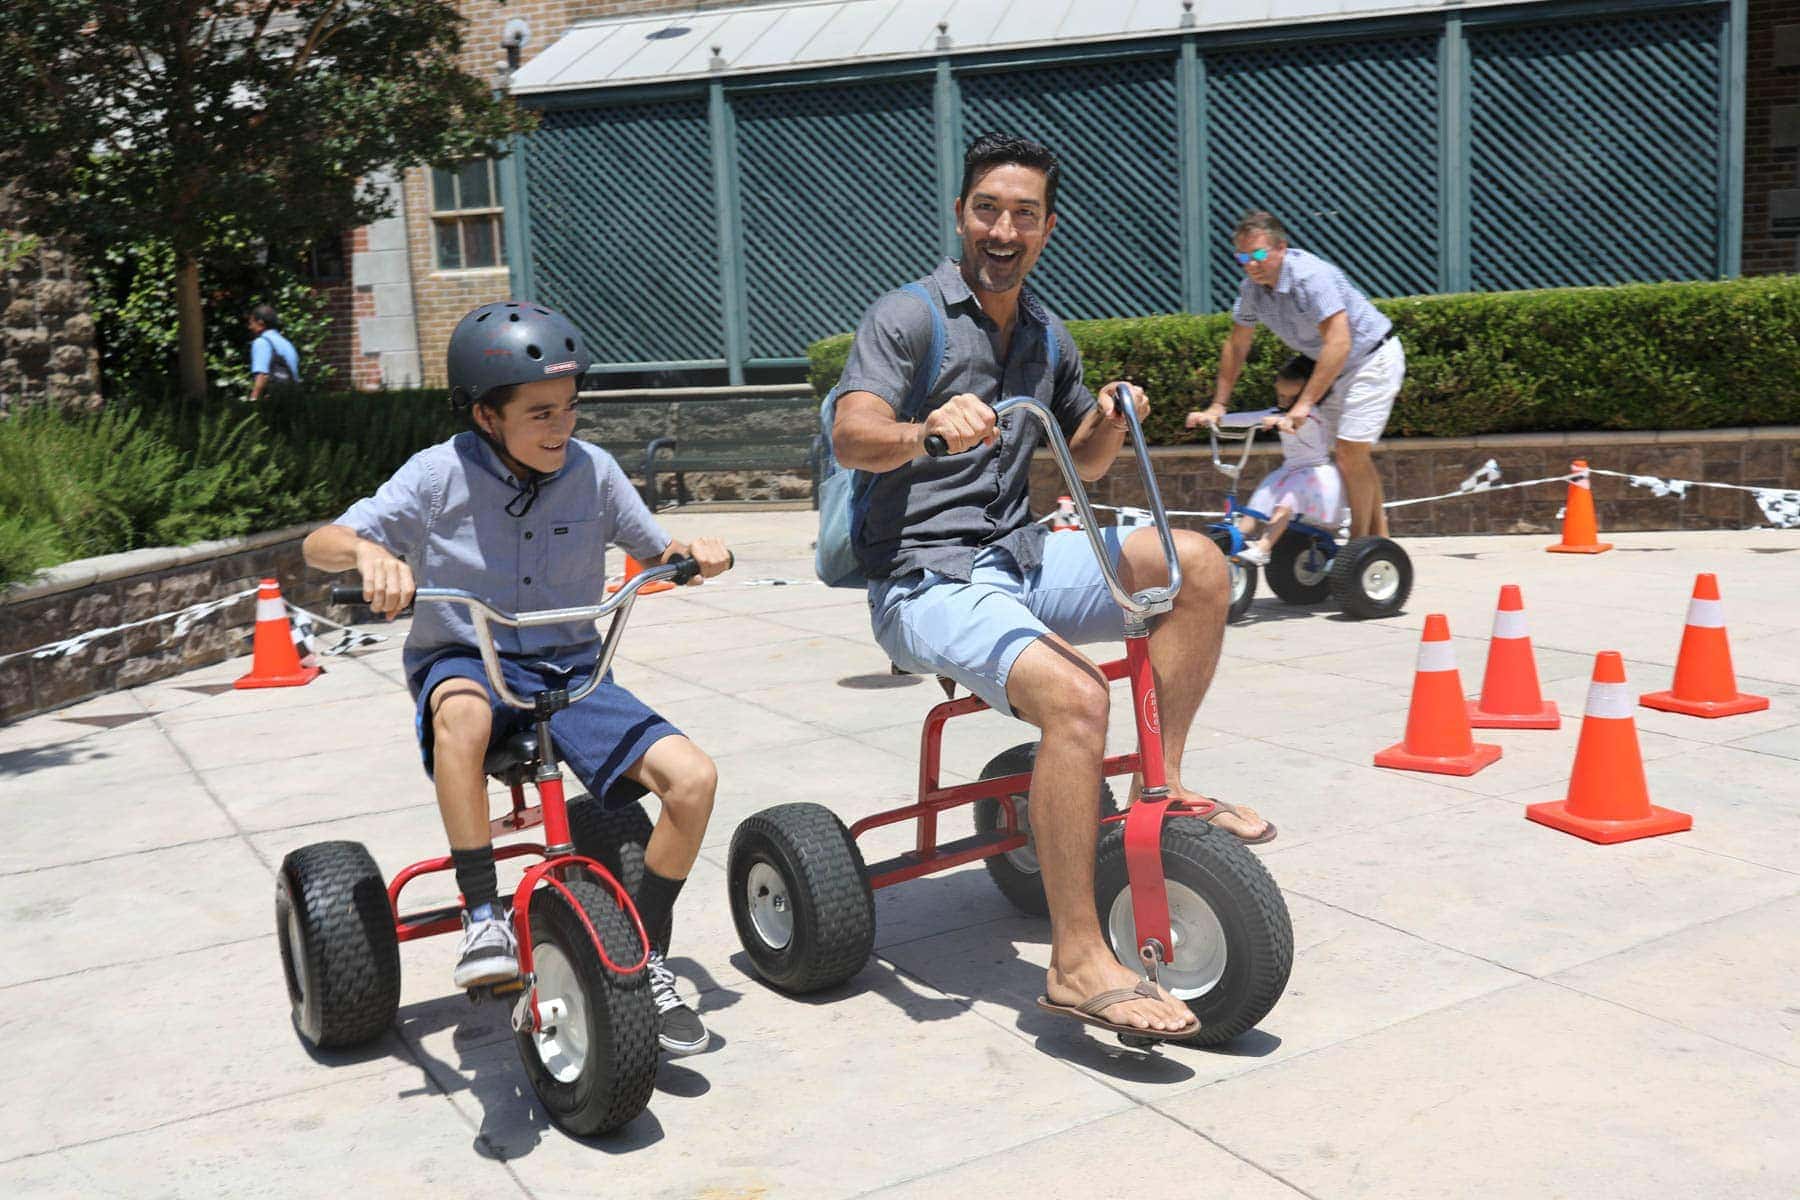 Father and Son Riding tricycles #hollywood #warnerbrothers #teentitansgotothemovies #citygirlgonemom